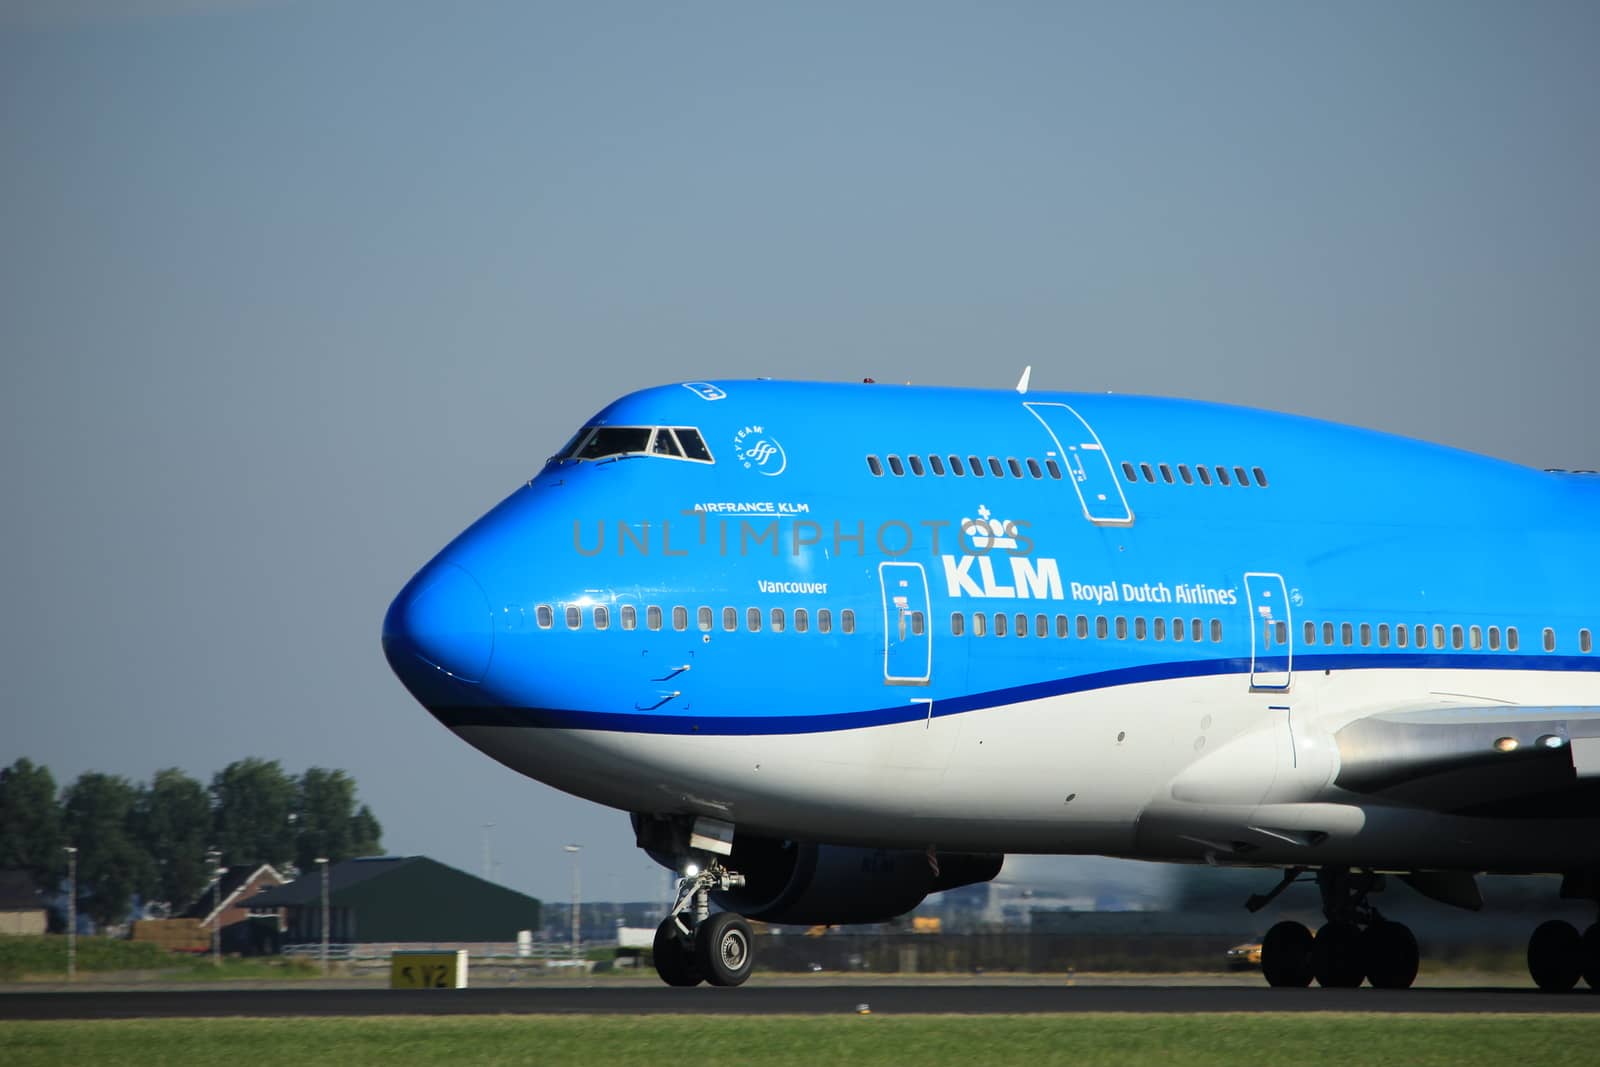 Amsterdam, the Netherlands - August, 18th 2016: PH-BFV KLM Royal Dutch Airlines Boeing 747-406(M) by studioportosabbia